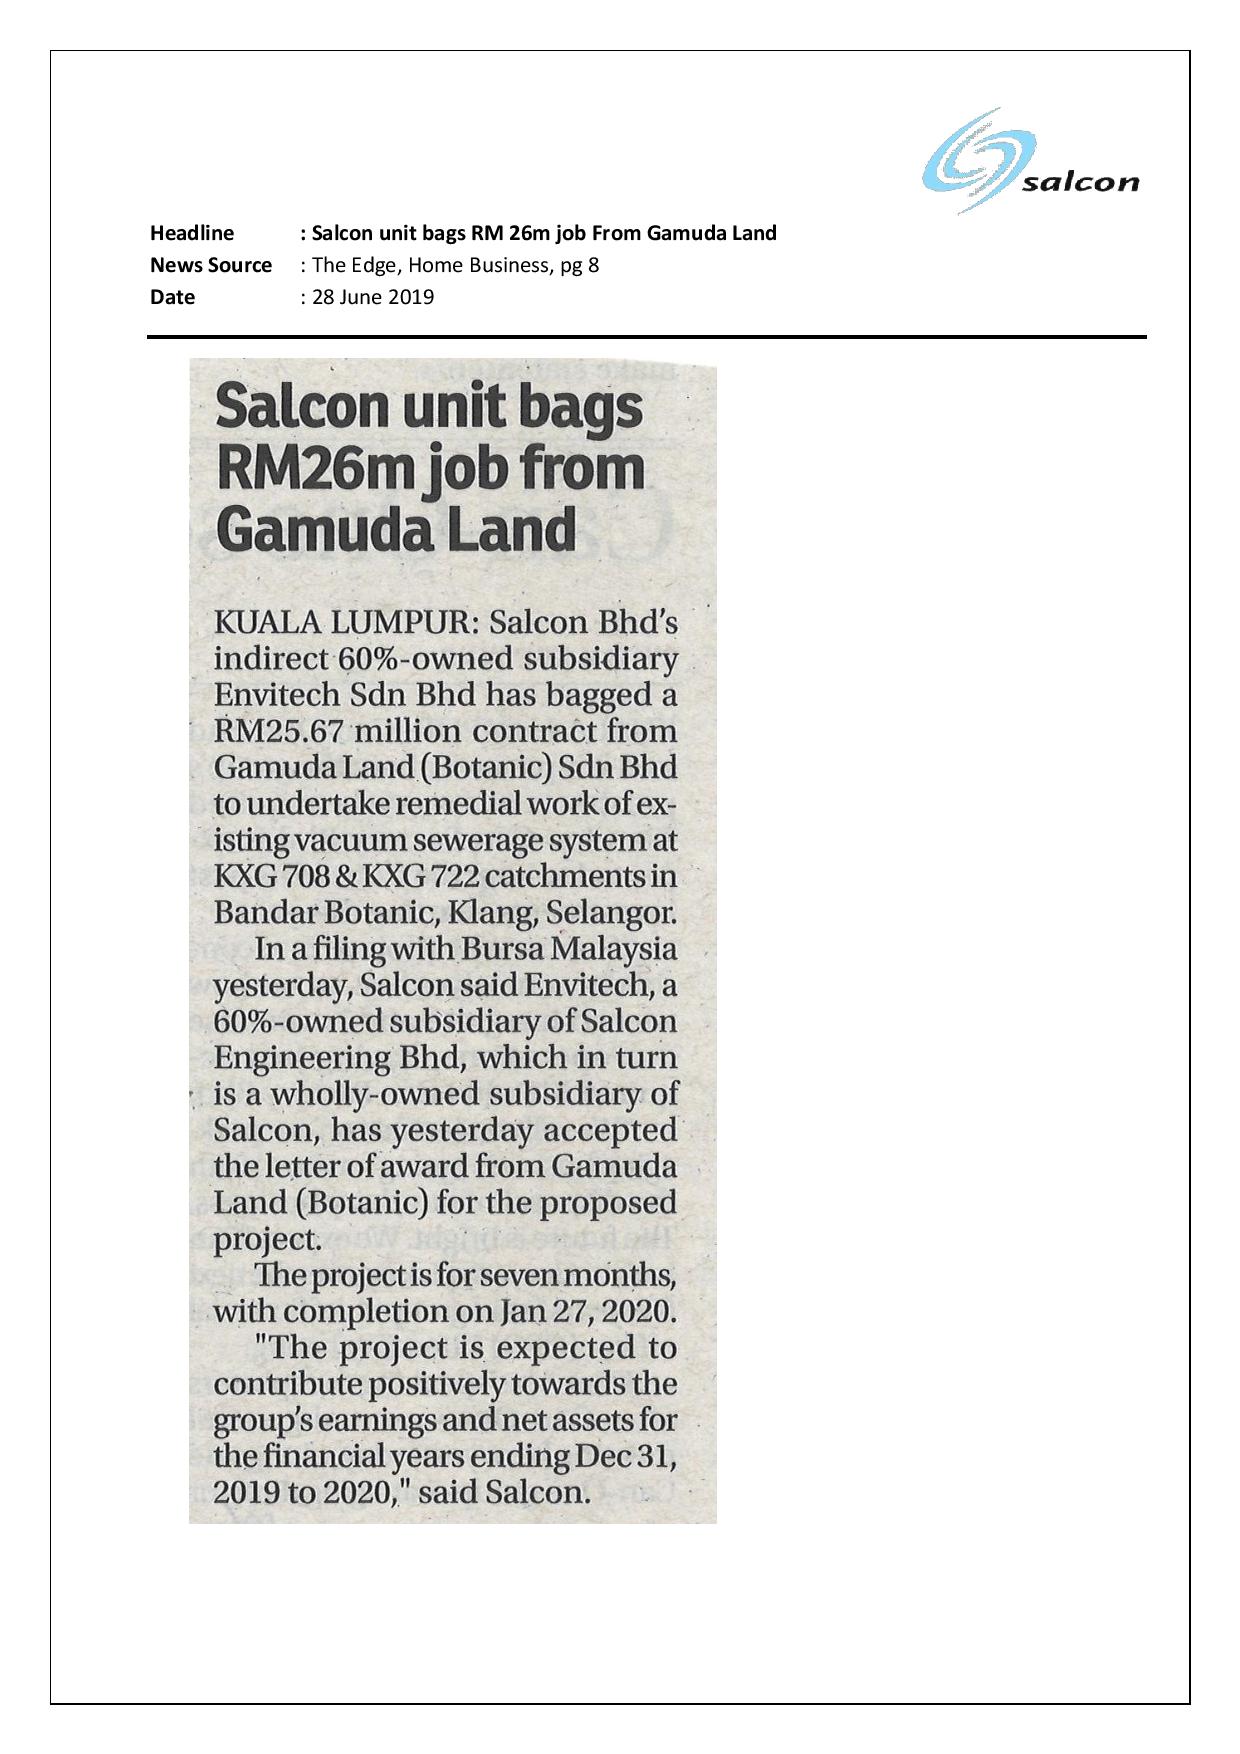 Salcon unit bags RM26m job from Gamuda Land